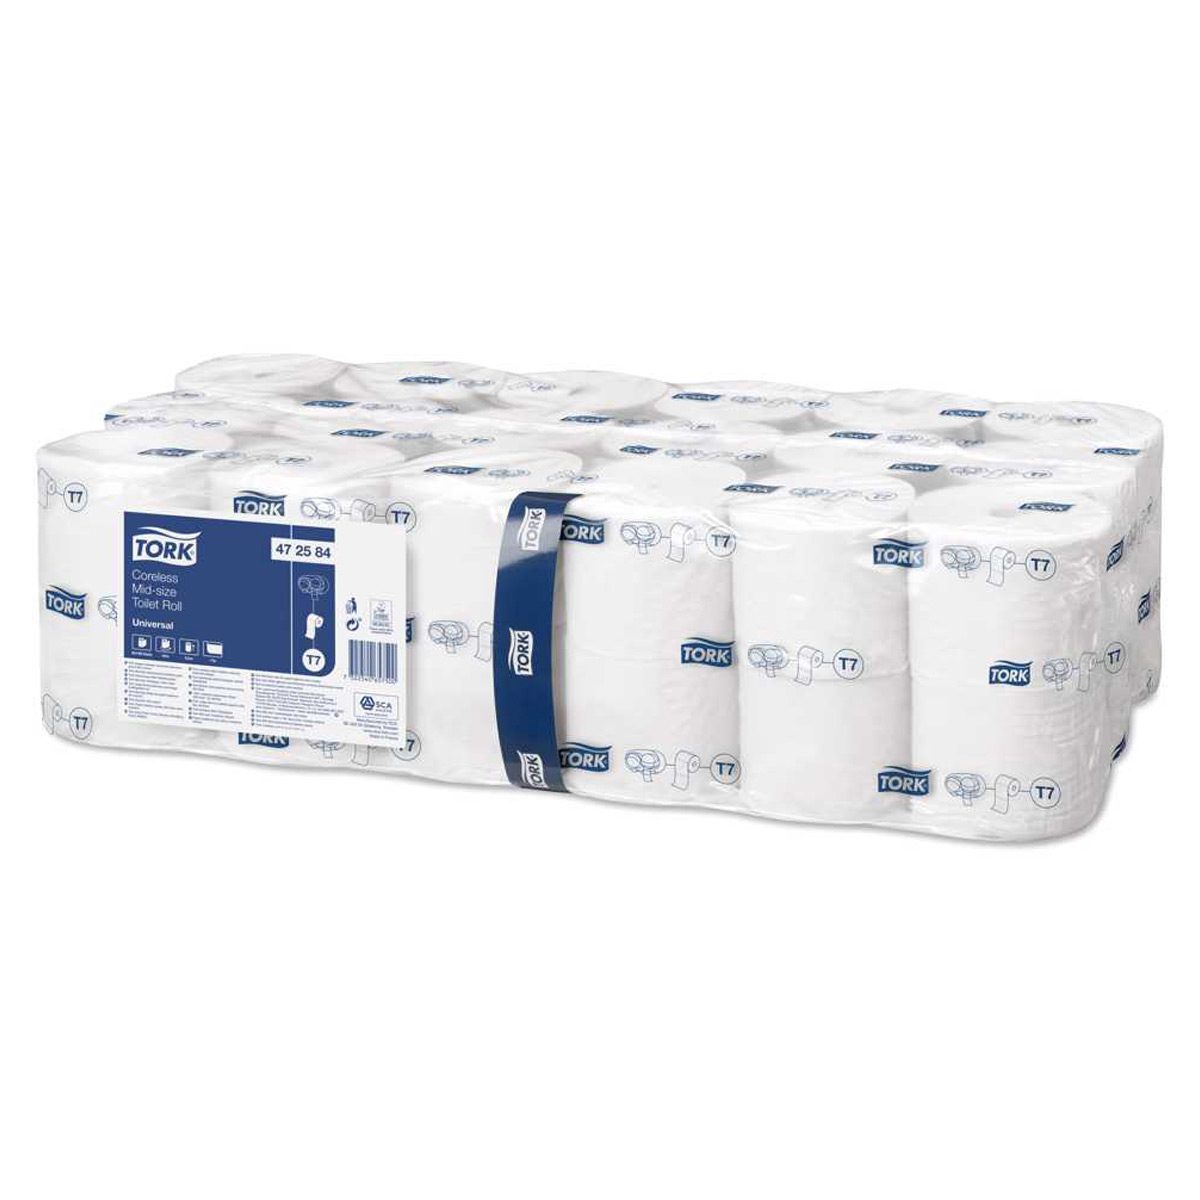 paper-products-toilet-paper-tork-coreless-mid-size-toilet-roll-t7-advanced-white-2-ply-900-sheets-36-rolls-balances-cost-and-performance-vjs-distributors-472199